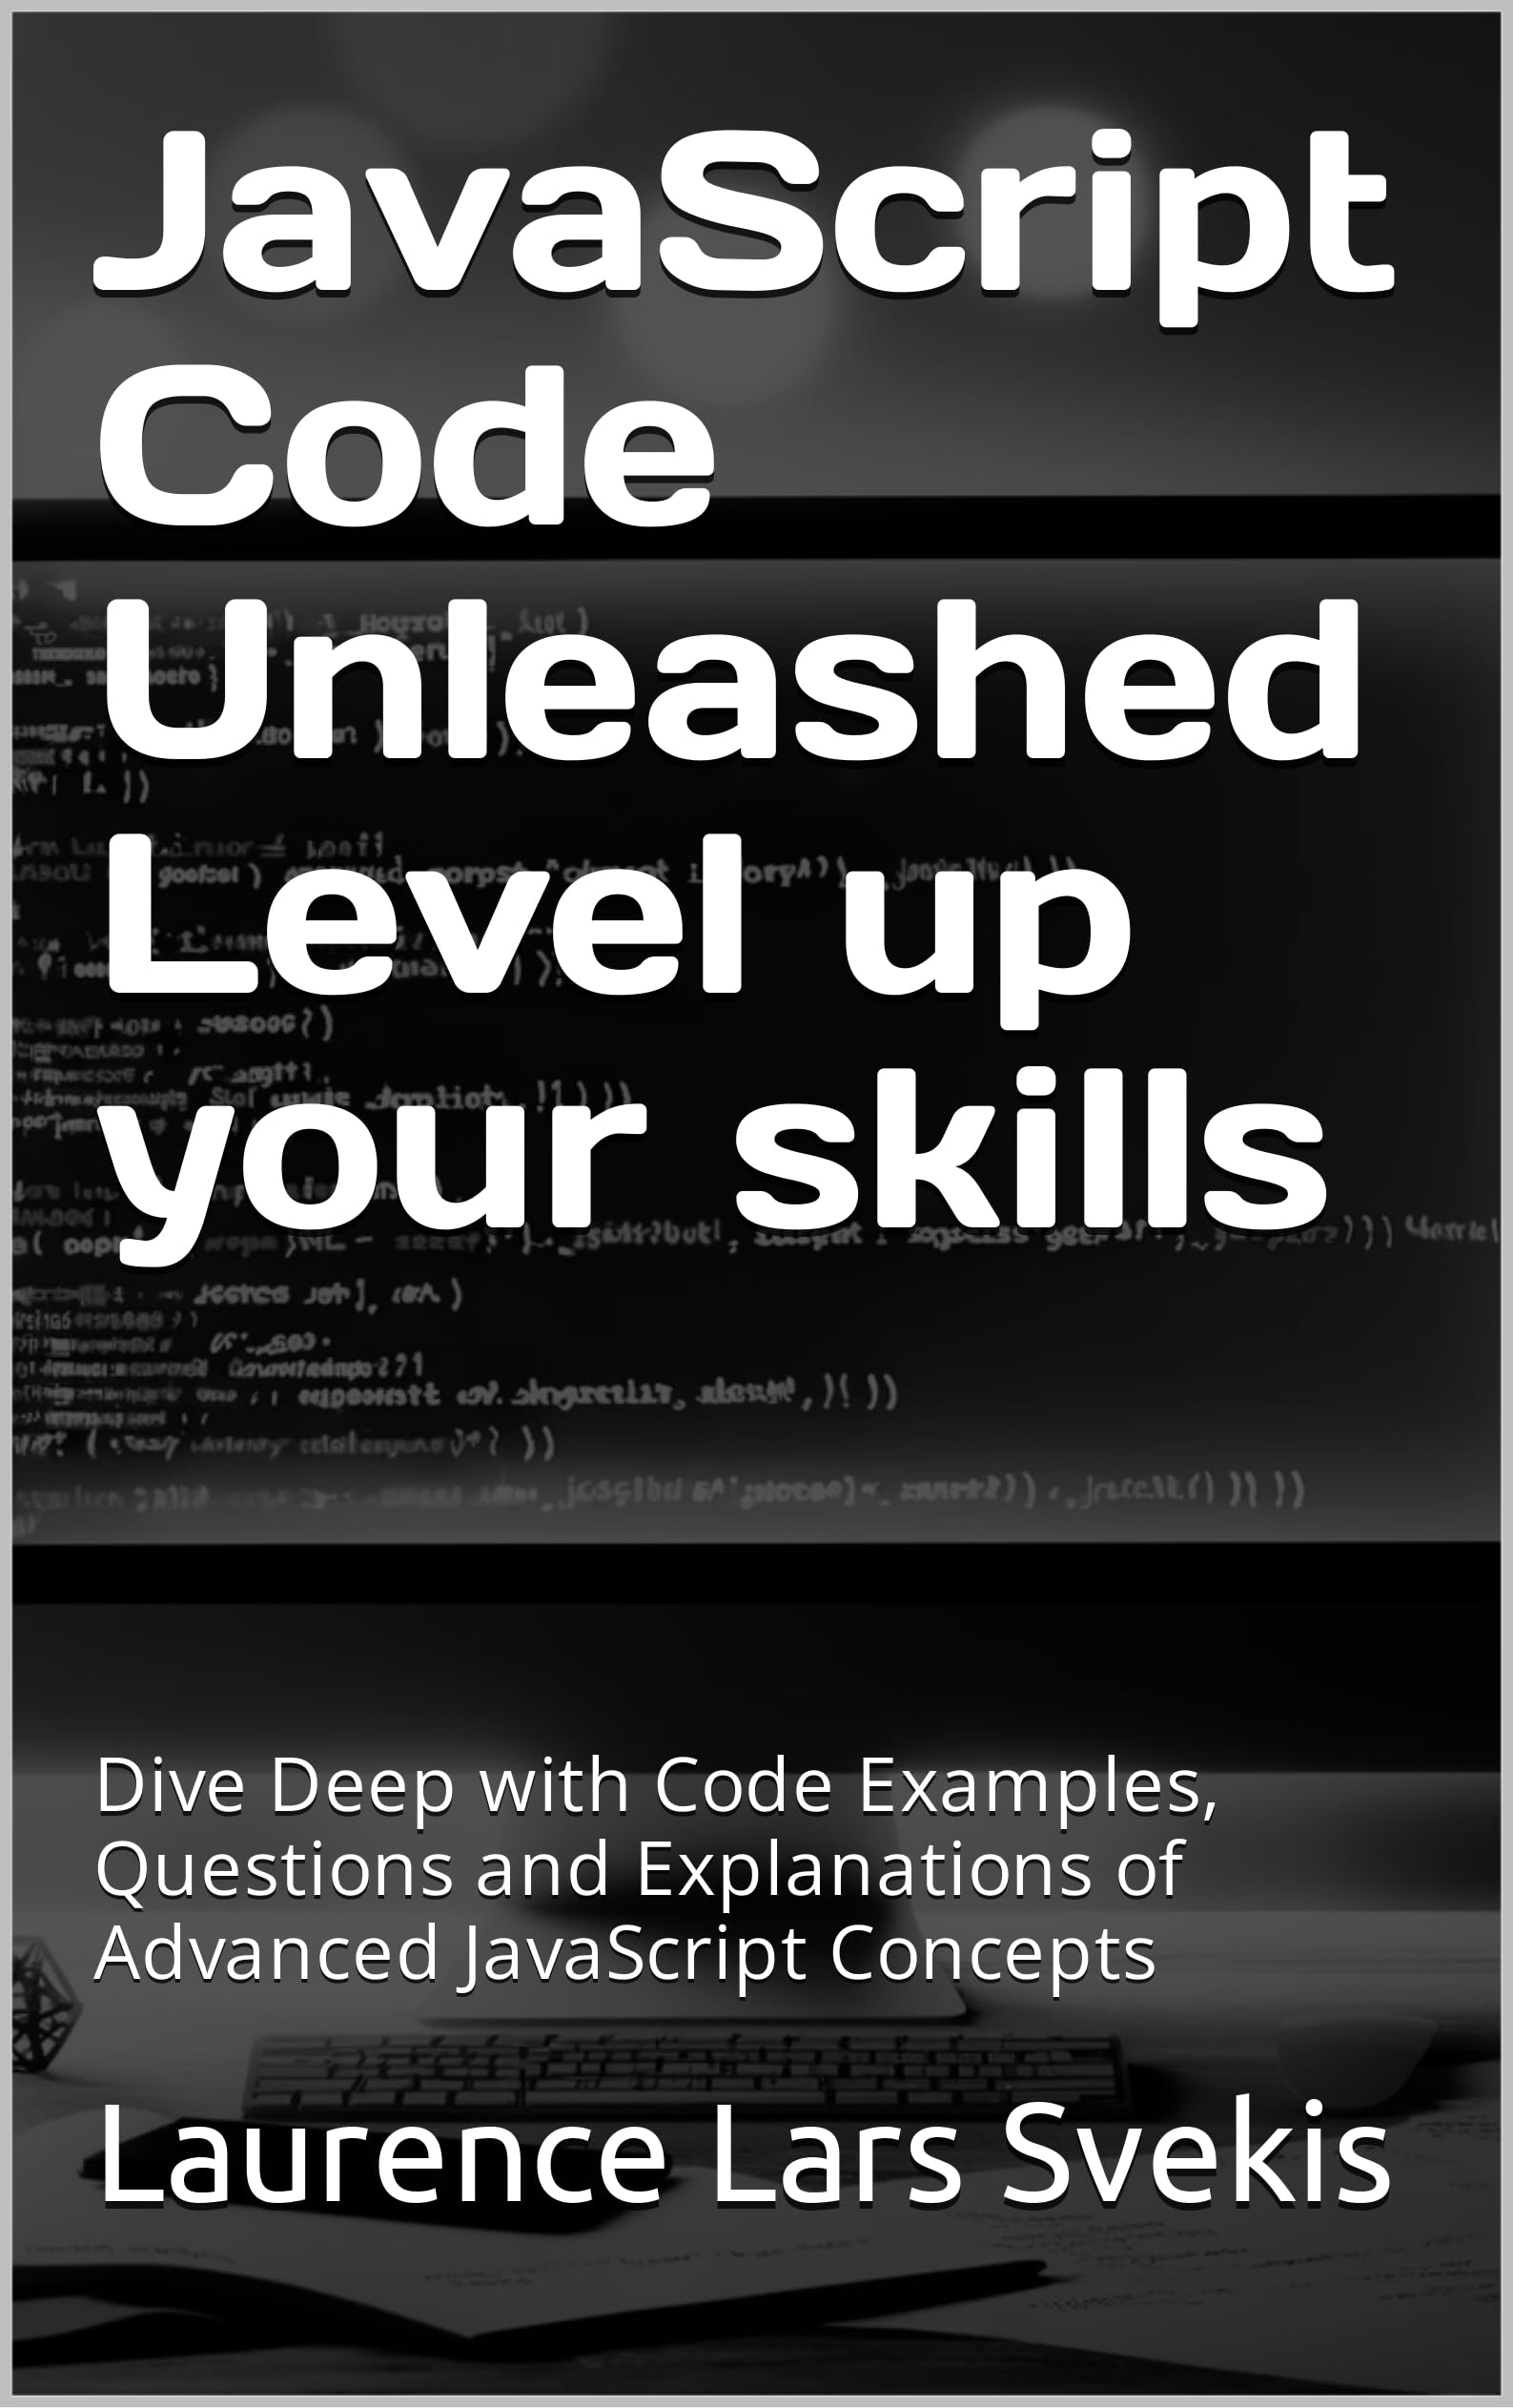 JavaScript Code Unleashed Level up your skills: Dive Deep with Code Examples, Questions and Explanations of Advanced JavaScript Concepts (Power Up your Coding Skills)